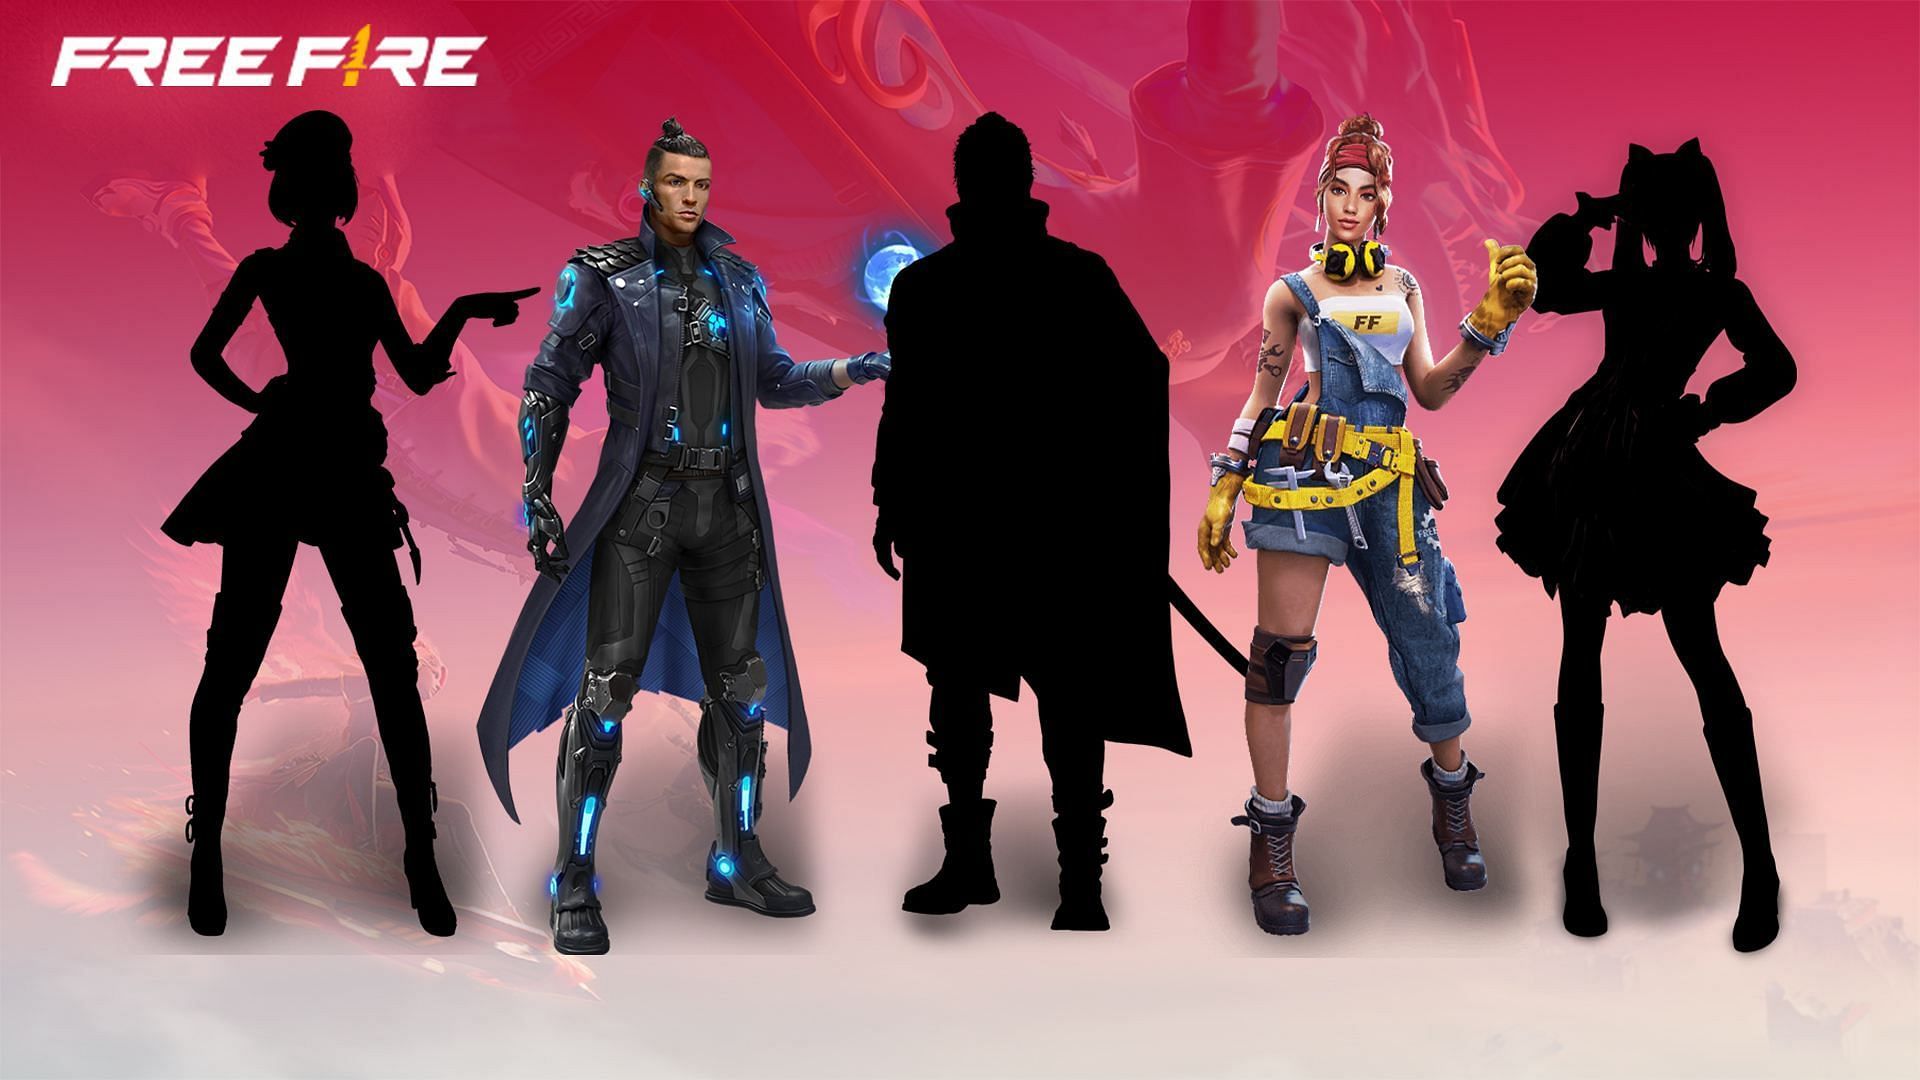 These Free Fire characters can be a better option after an update (Image via Sportskeeda)